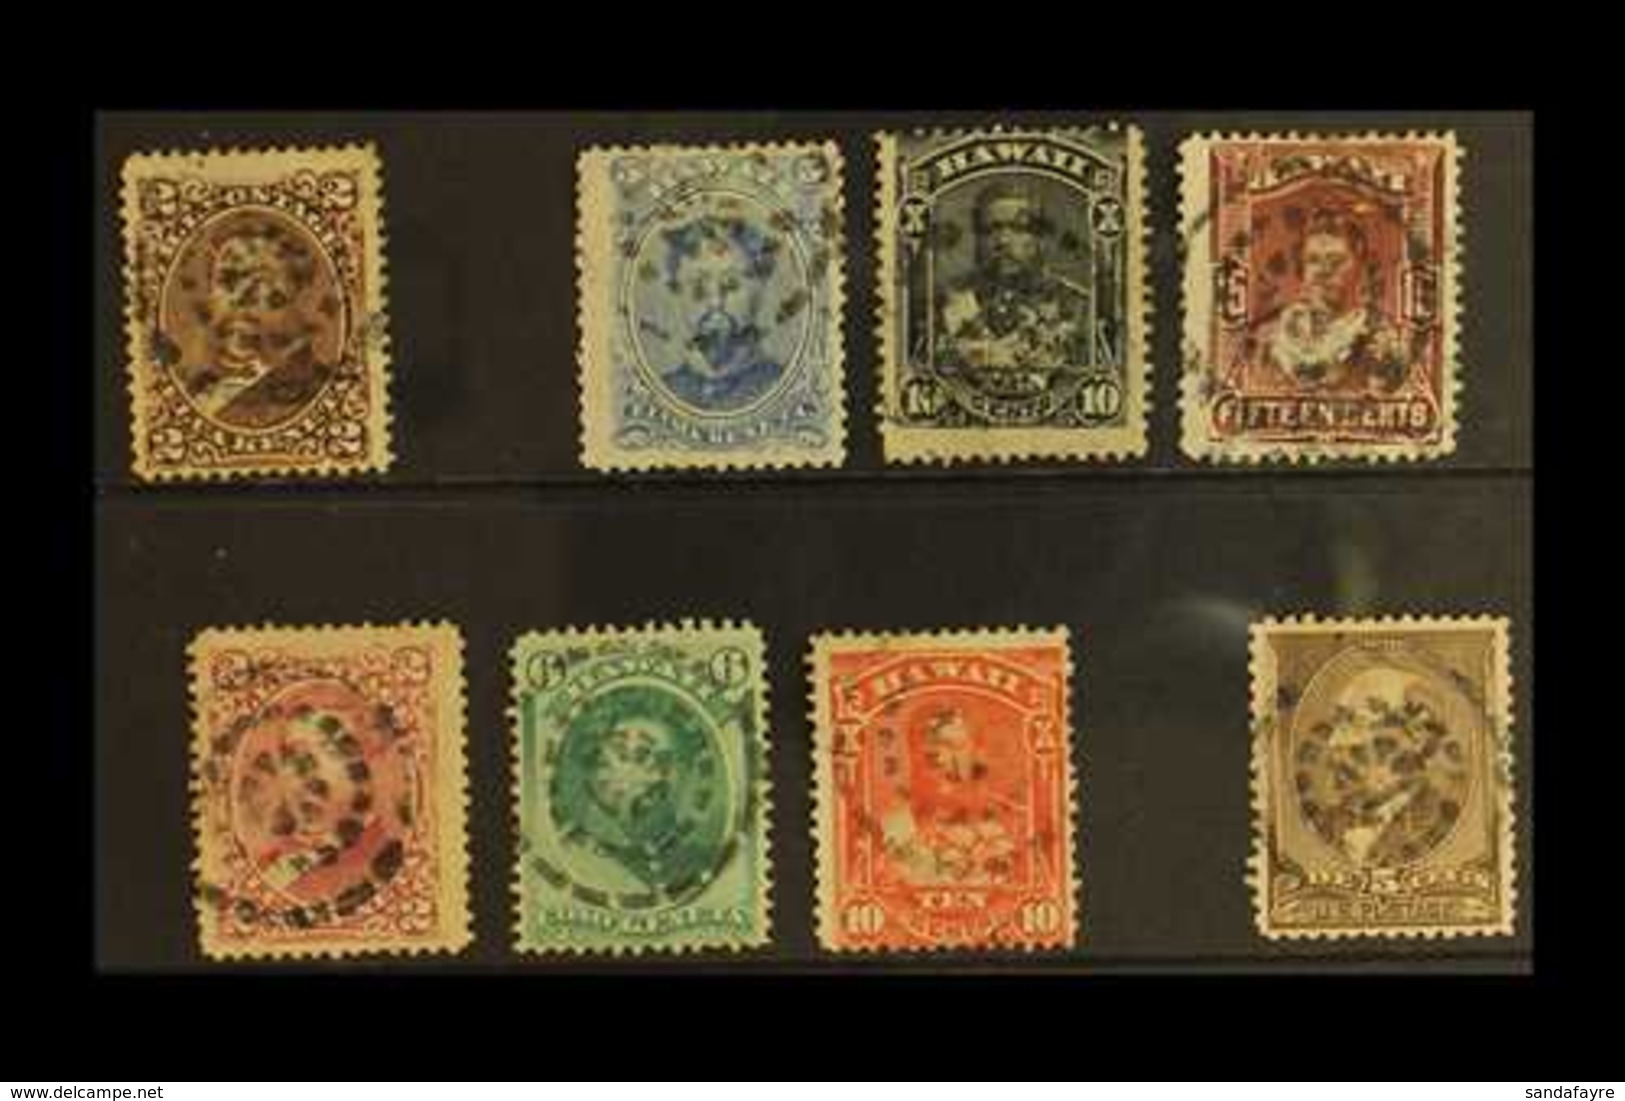 POSTMARKS DISTINCTIVE TARGET STYLE CANCEL On Range Of 1875-86 Issues, All Different With Values To 15c, Plus USA 1882 5c - Hawaï